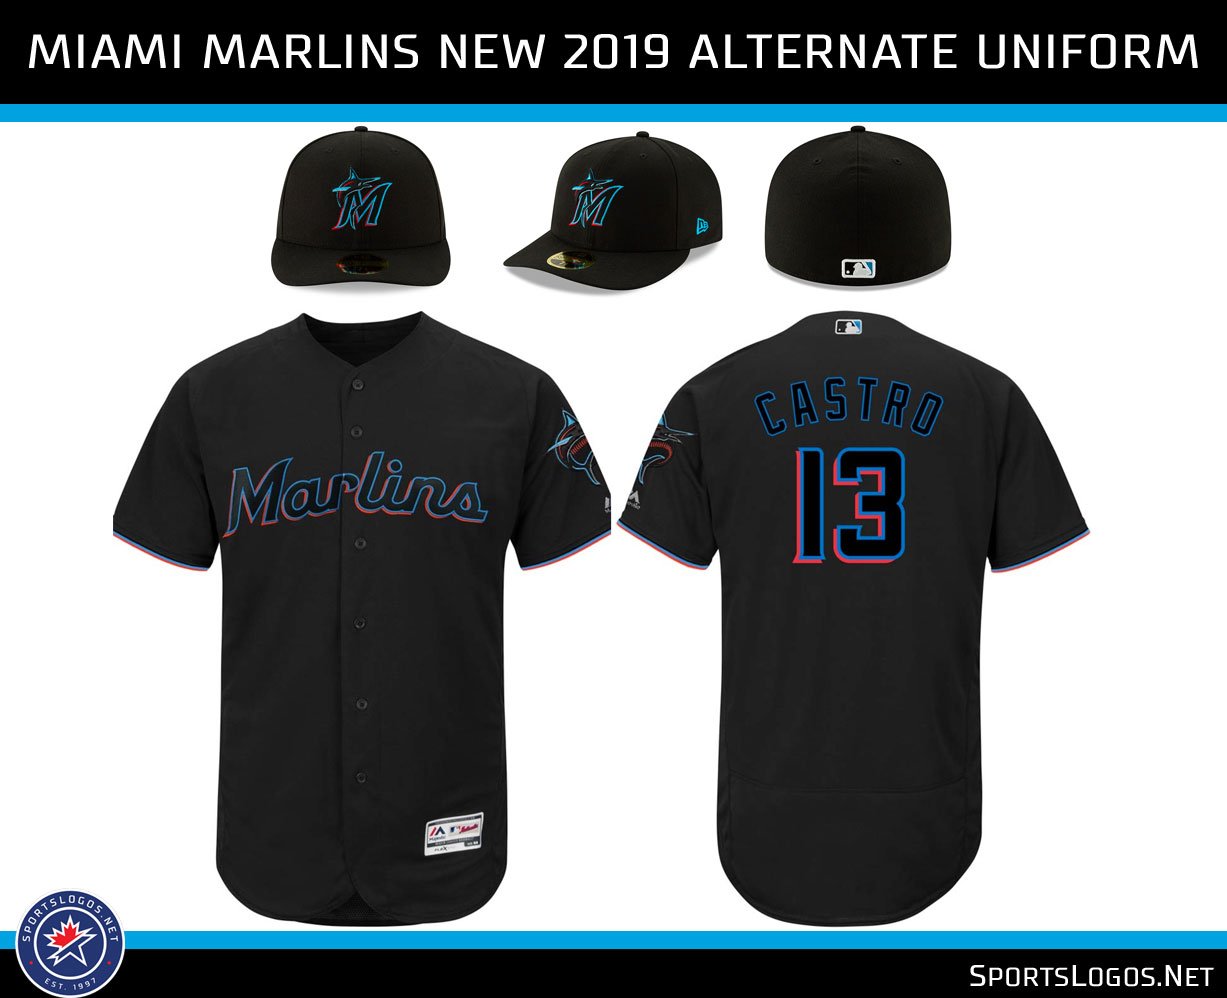 Lots of talk about a probable new Marlins logo and uniforms. I designed  this back in fall 2011 just before the current logos were unveiled. : r/mlb